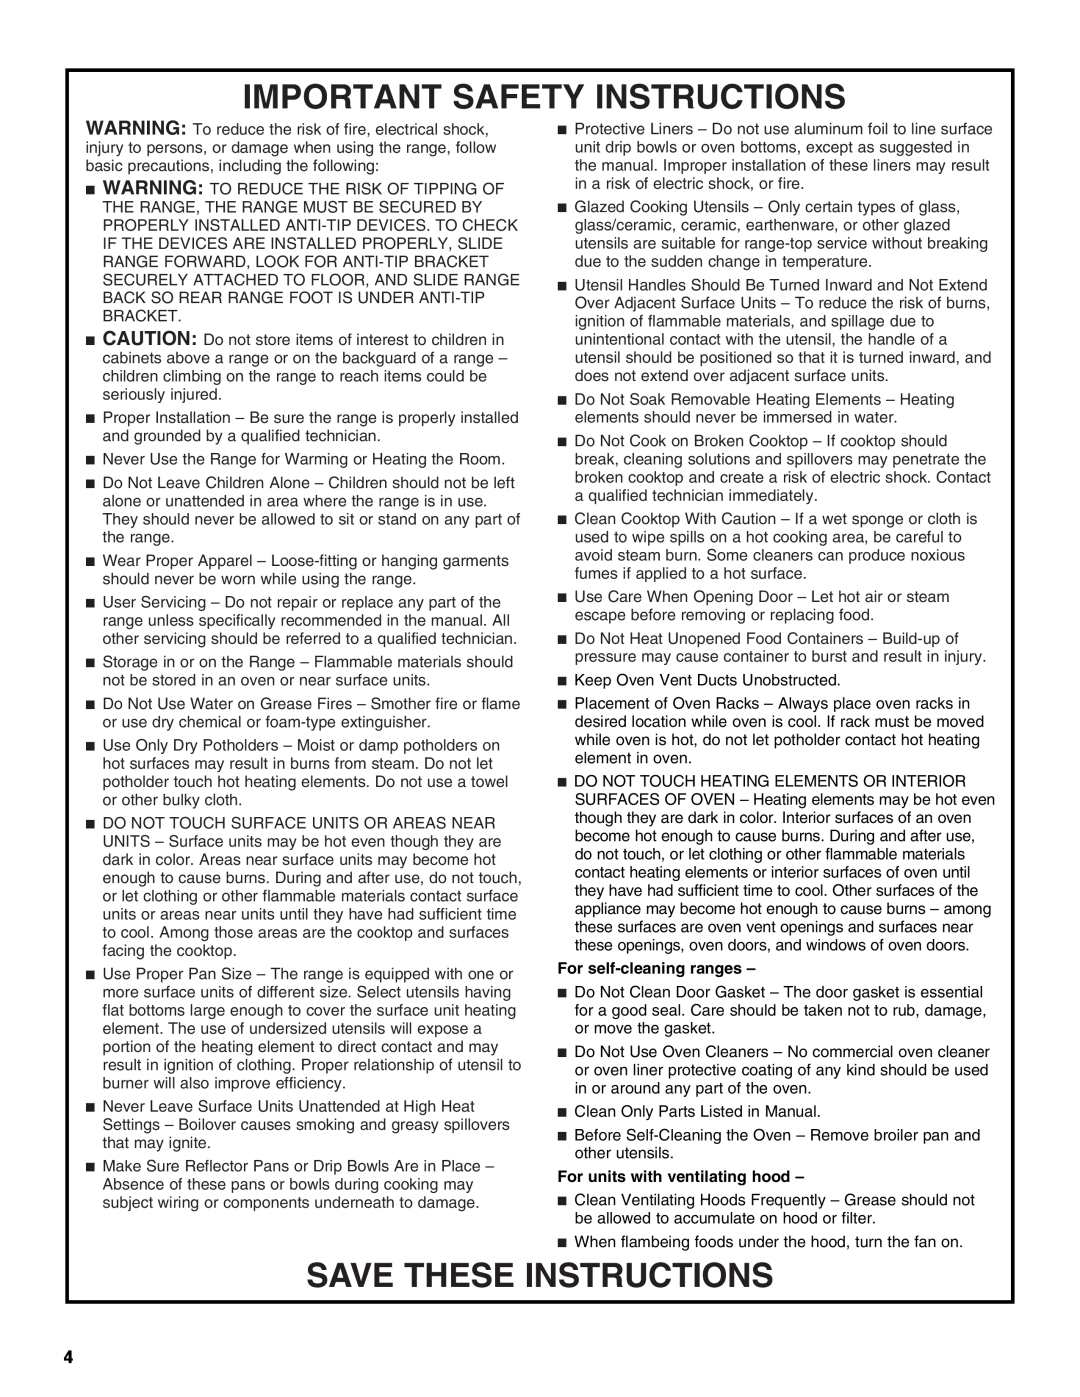 Whirlpool W10120516A manual Important Safety Instructions, Save These Instructions, For self-cleaningranges 